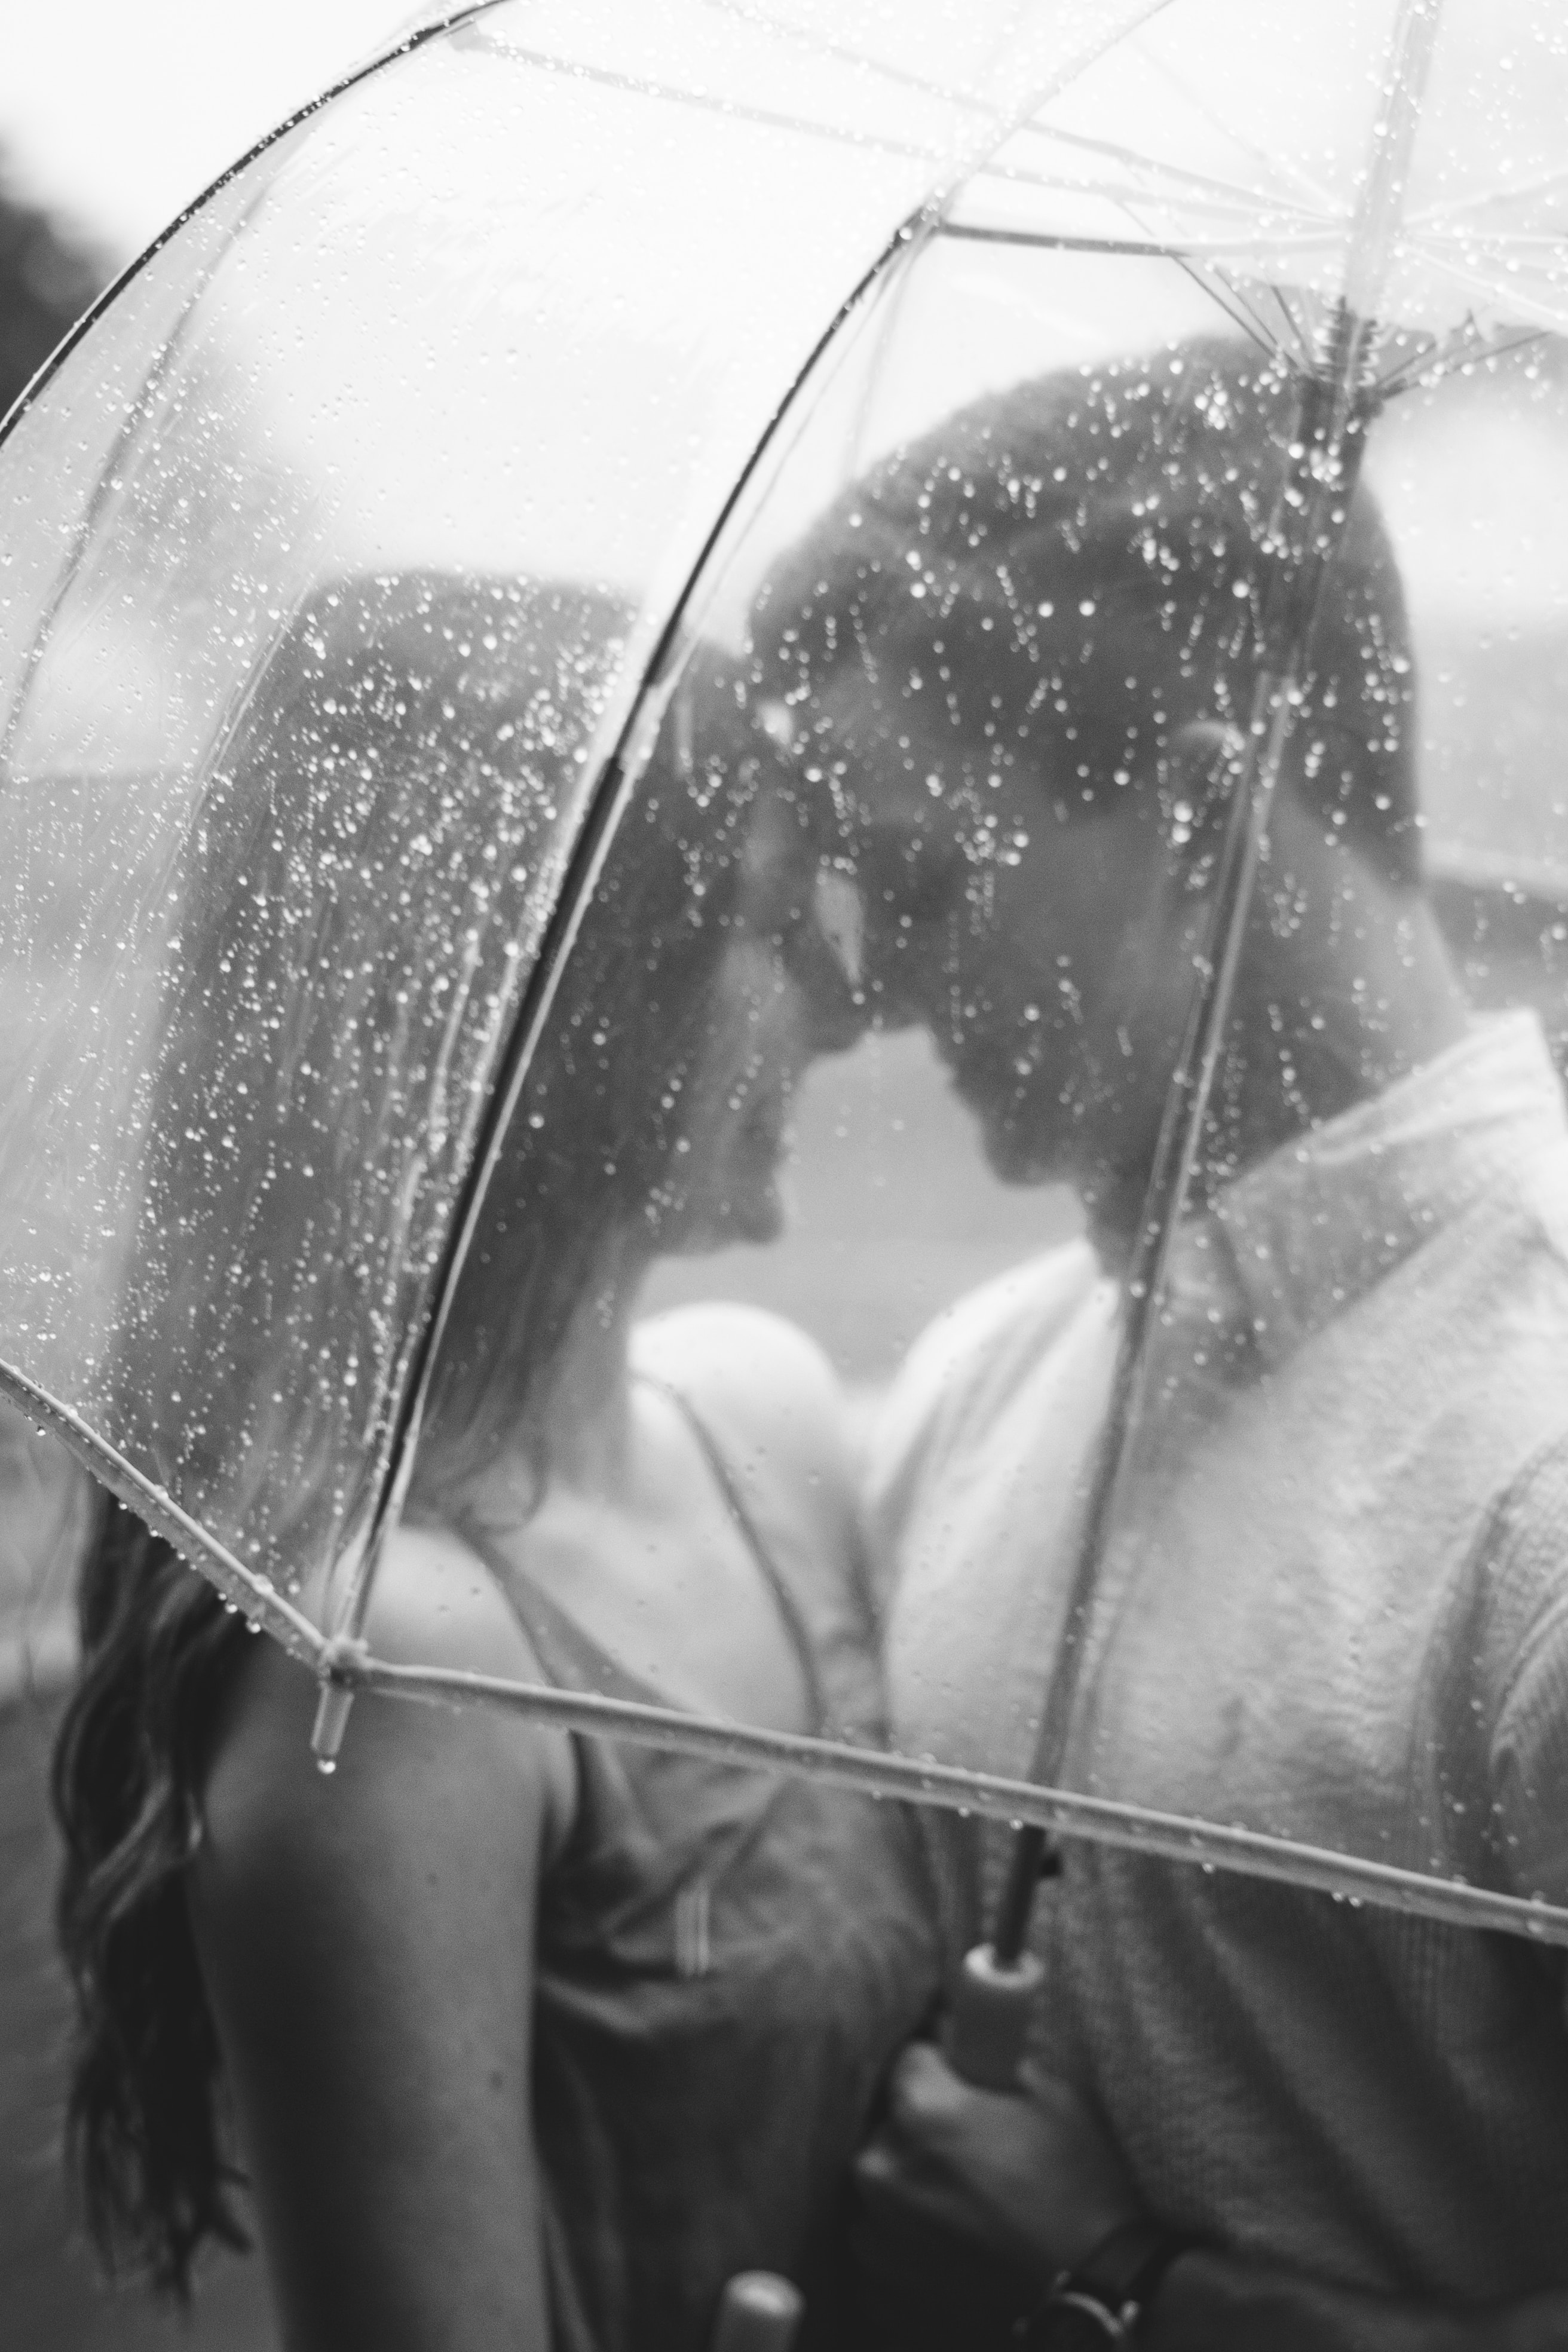 Woman immaculately smiling at her partner under a transparent umbrella | Source: Unsplash